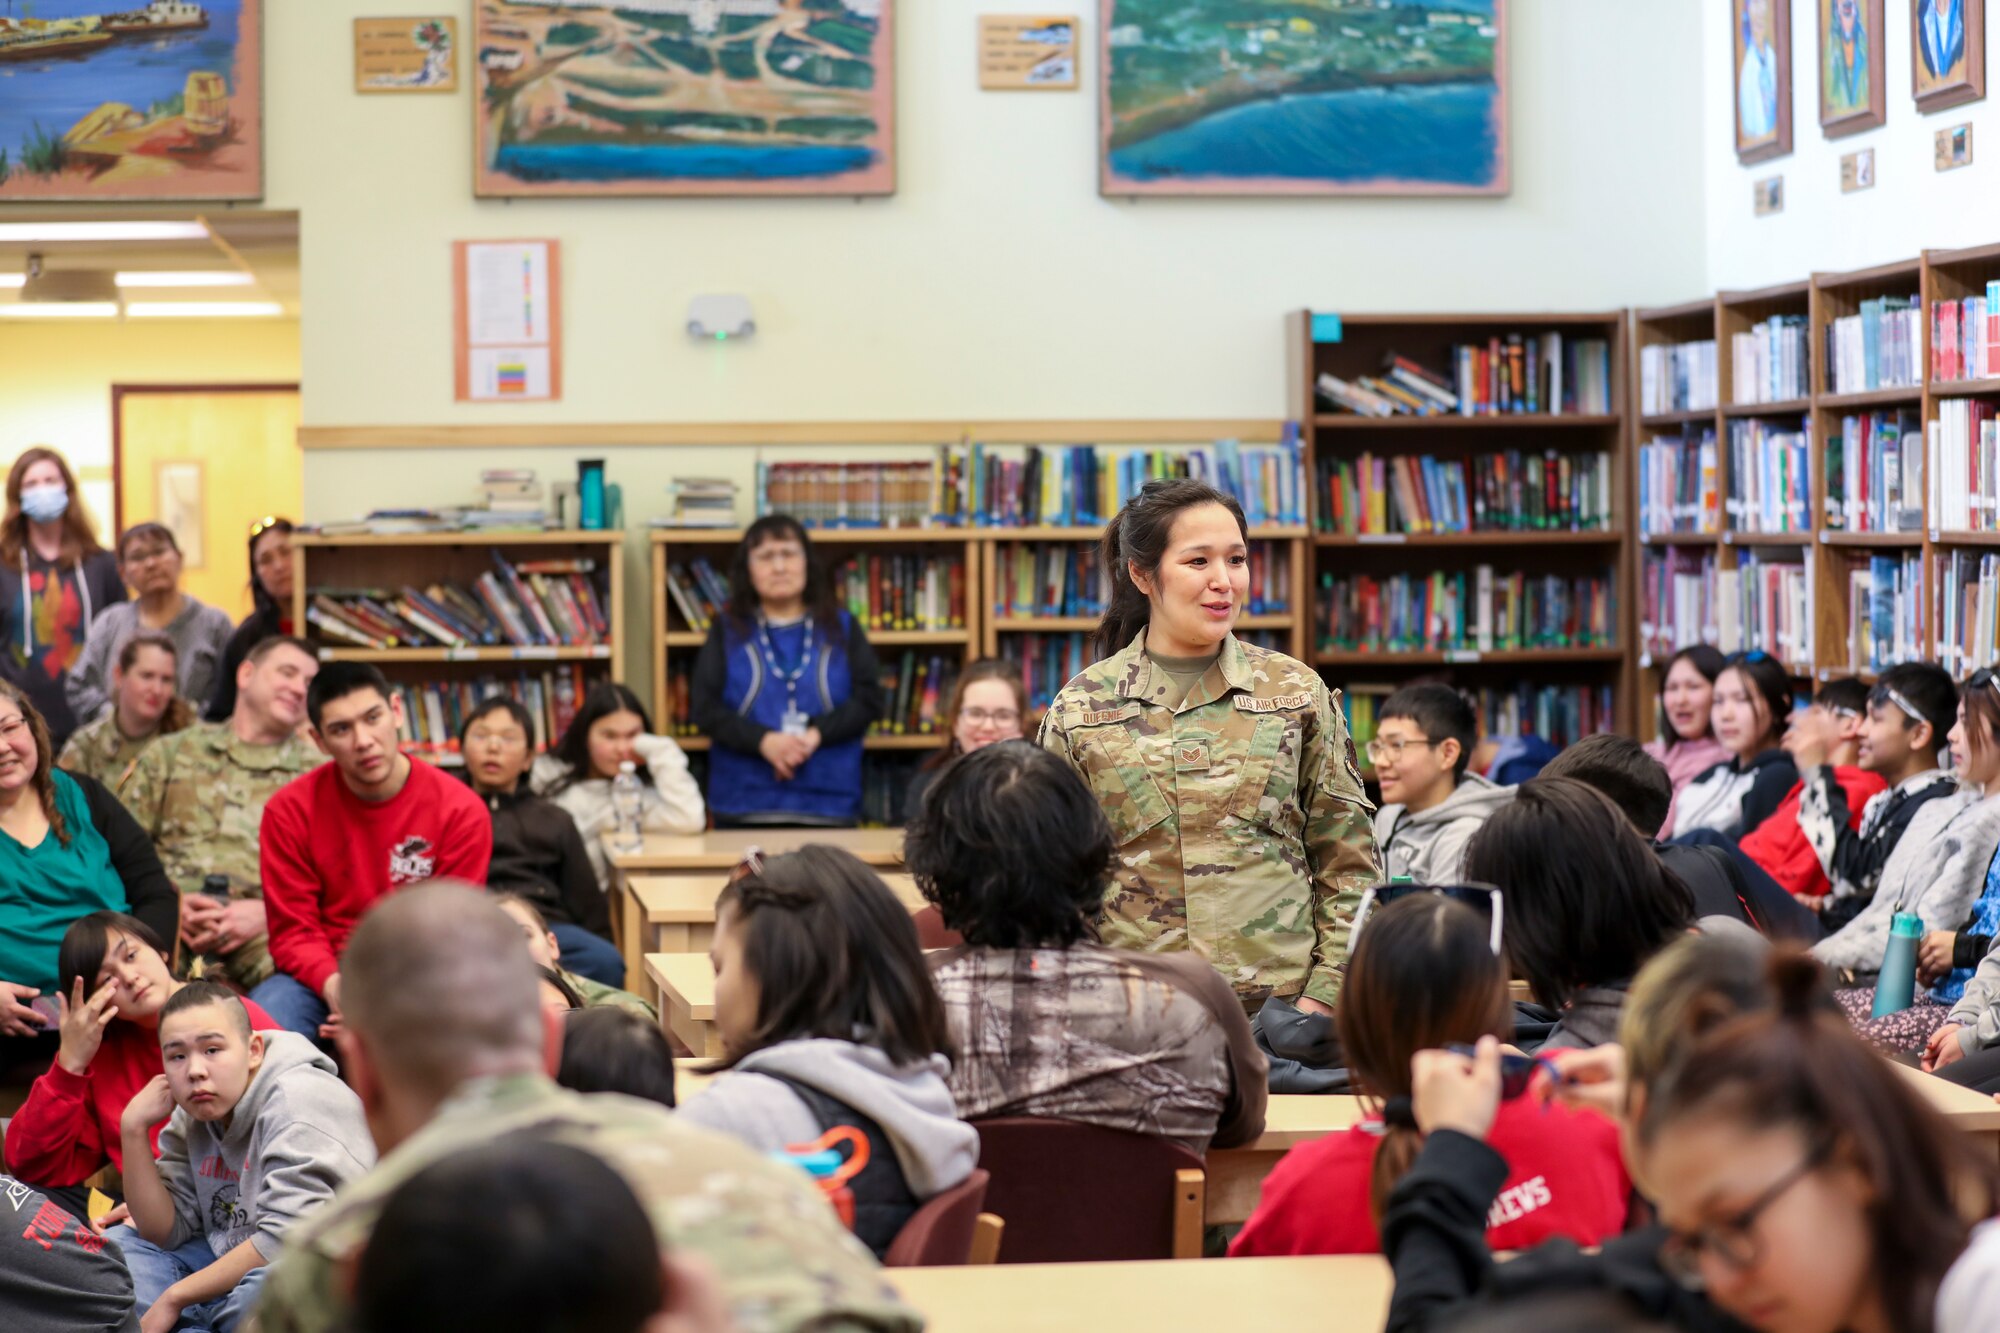 Alaska Air National Guard Staff Sgt. Sharon Queenie, a surveillance technician with the 176th Air Defense Squadron, gives a presentation to students from her hometown of St. Mary’s, Alaska, during a recruiting initiative in partnership with the Association of Village Council Presidents at the Andreafski High School, March 31, 2023. The Association of Village Council Presidents recently partnered with the Alaska National Guard to provide recruiting information and resources through their Tribal Job Centers. The initiative kicked off in St. Mary’s with presentations from AVCP and AKNG, where representatives interacted with students, parents, teachers, and community members. AVCP provides community development, education, social services, culturally relevant programs, and advocacy for the people and 56 tribes of Western Alaska.